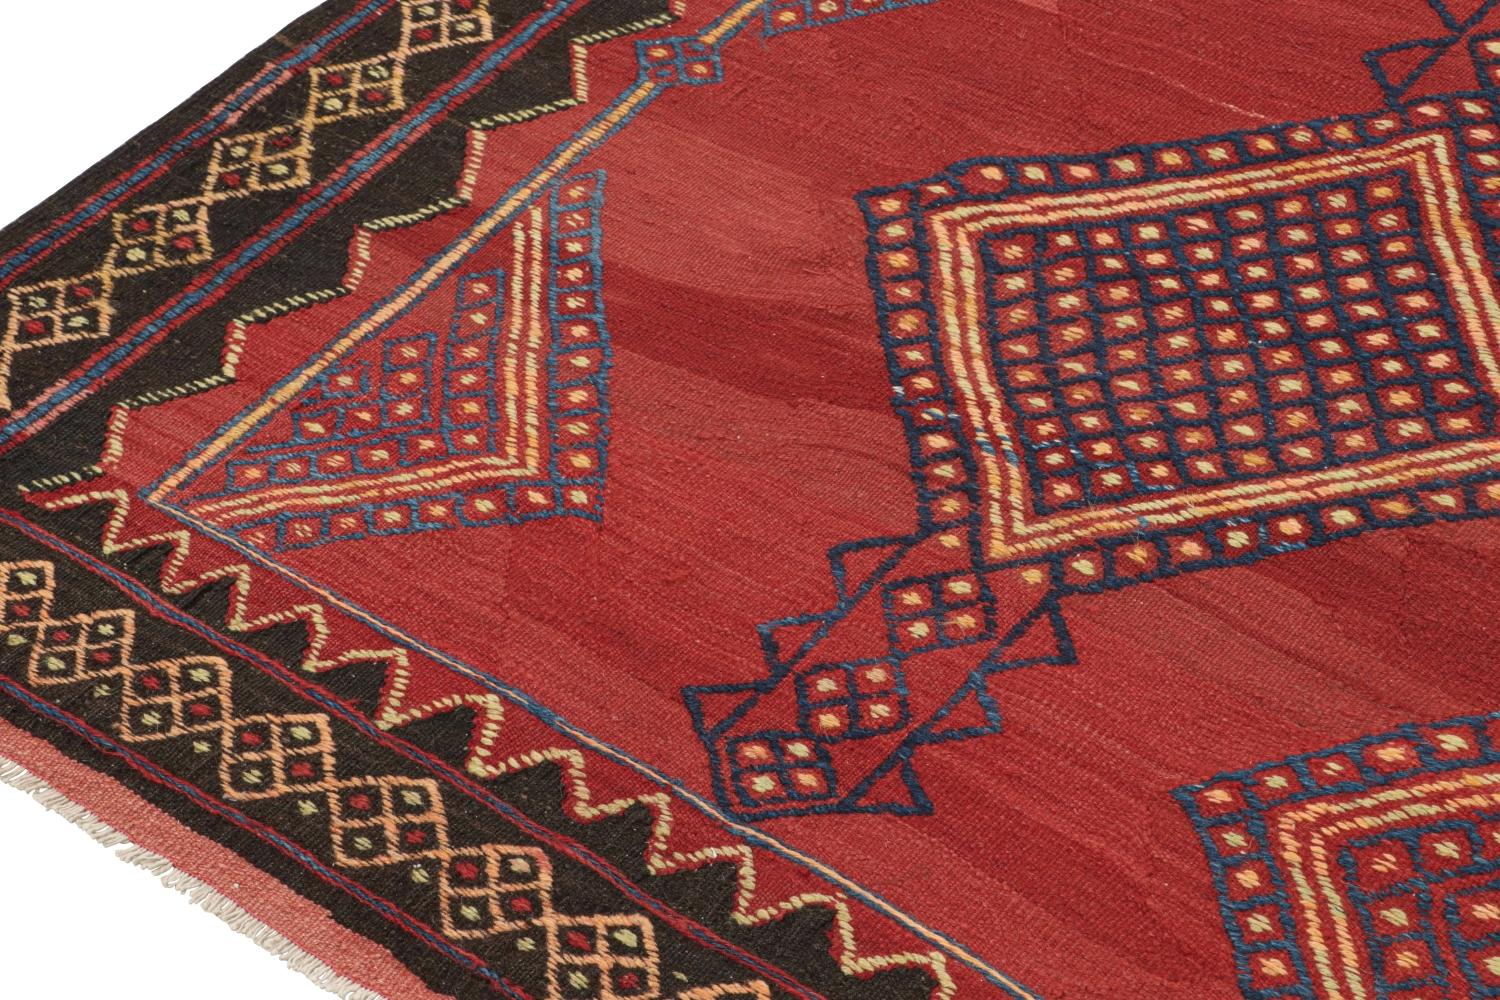 Mid-20th Century Vintage Persian Kilim in Red with Blue Geometric Patterns For Sale